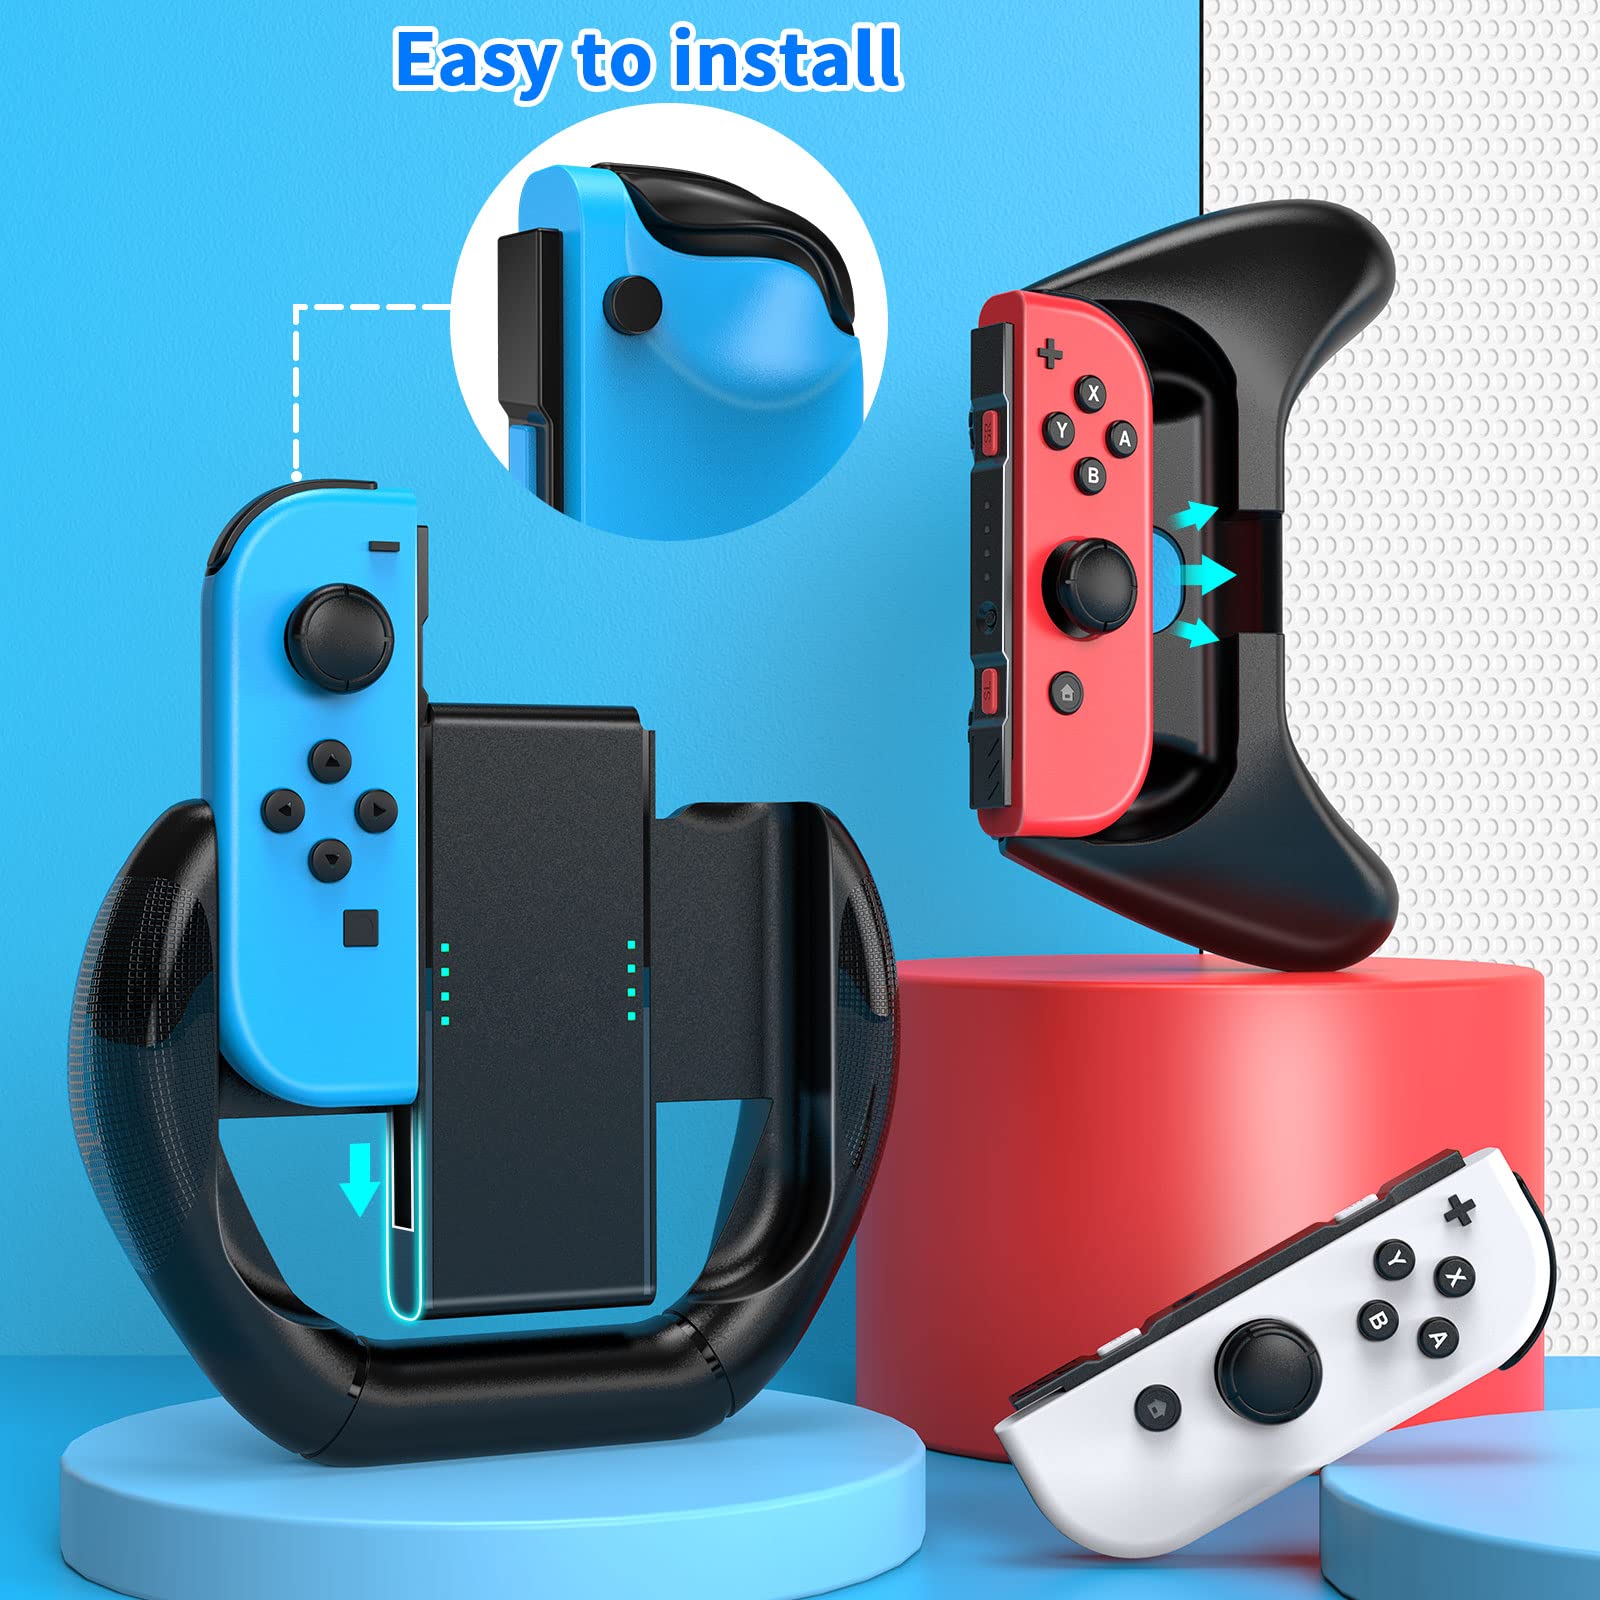 Mooroer Grip Compatible with Nintendo Switch & Switch OLED Joy-Con, Joy-Con Controller Comfort Grip Kit for Nintendo Switch Joy Con, Joy-Con Steering Wheel & Grips, 3 Pack [Black]